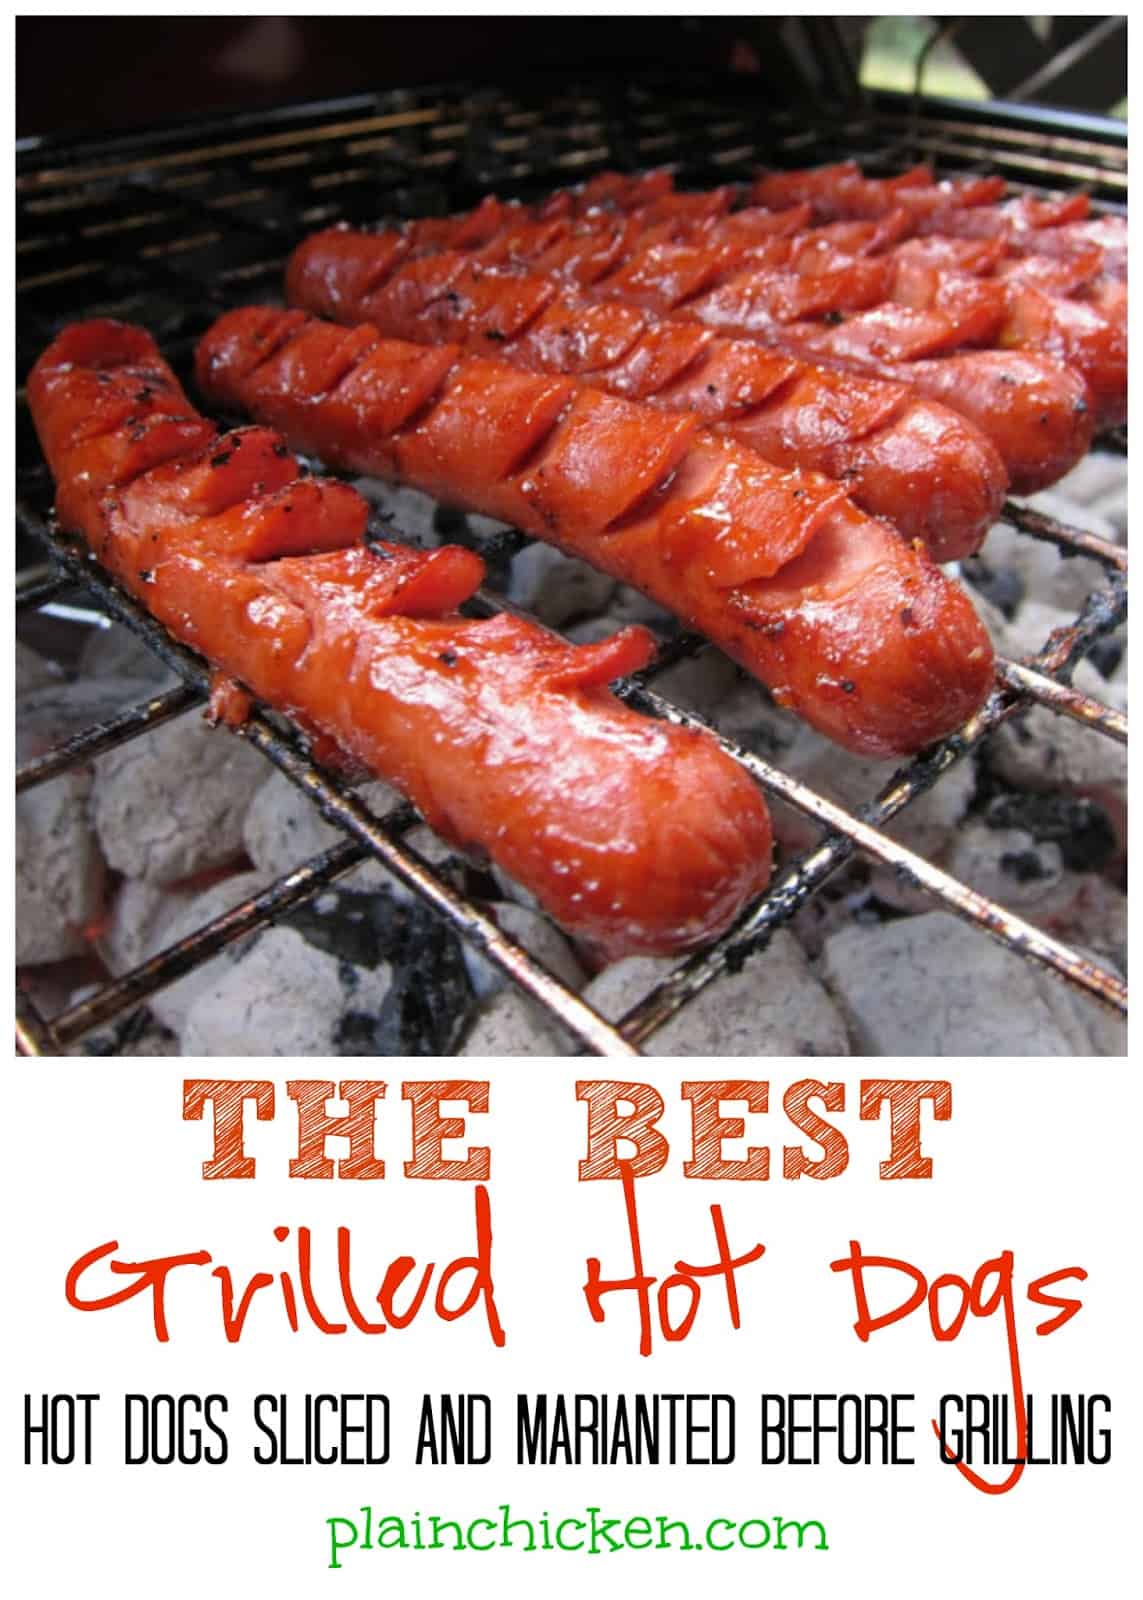 THE BEST Grilled Hot Dogs - hot dogs sliced and marinated before grilling - you will never grill hot dogs any other way! These are seriously amazing!!